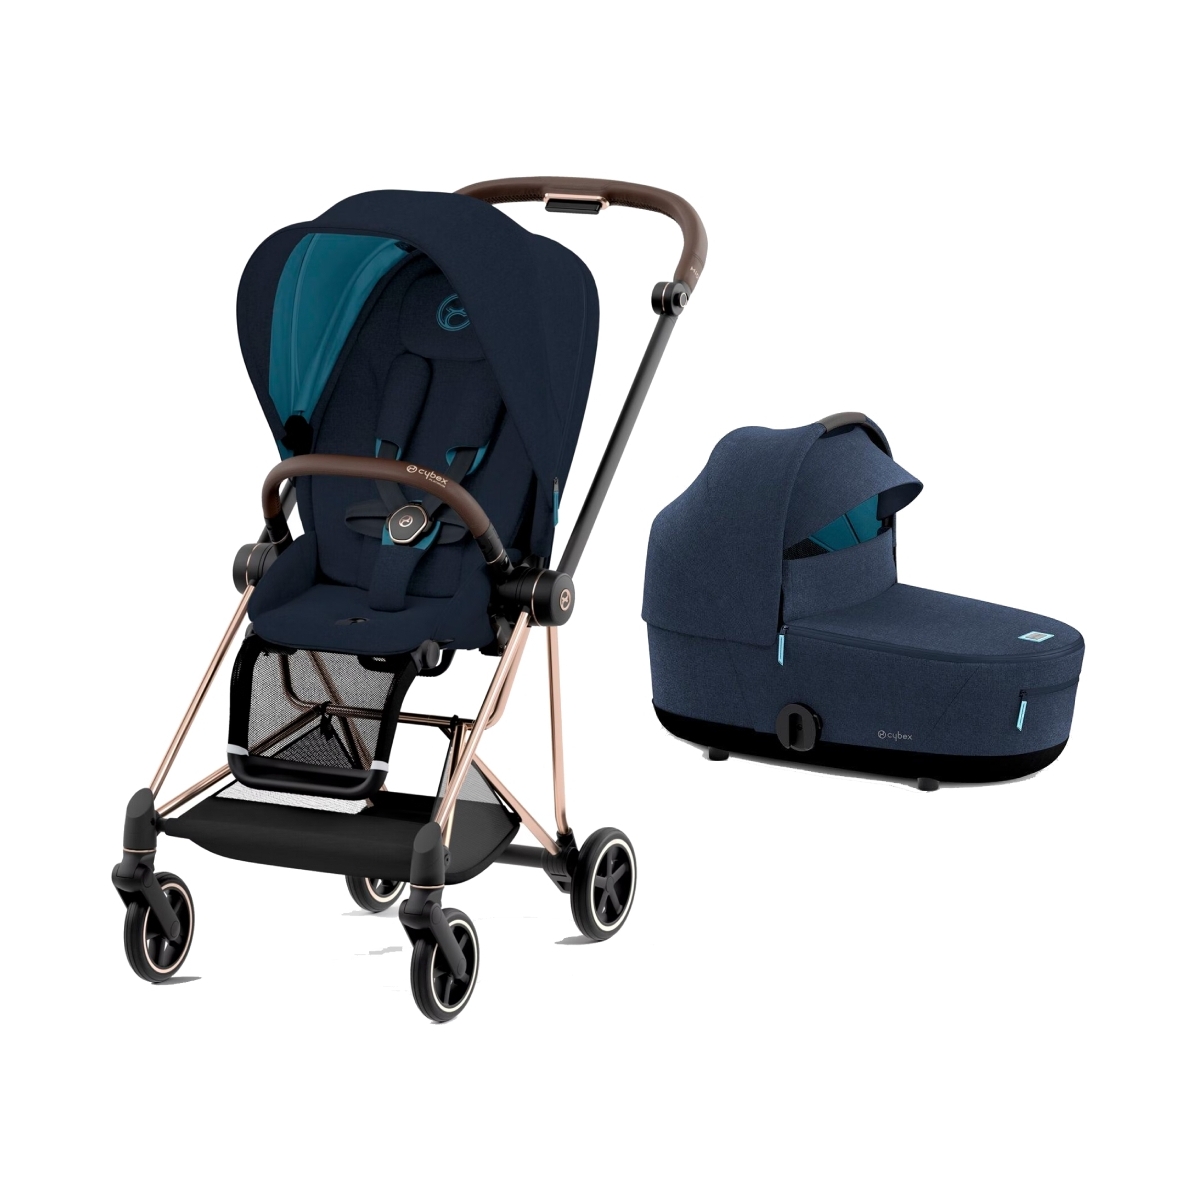 Cybex Mios Rose Gold Pushchair with Lux Carry Cot